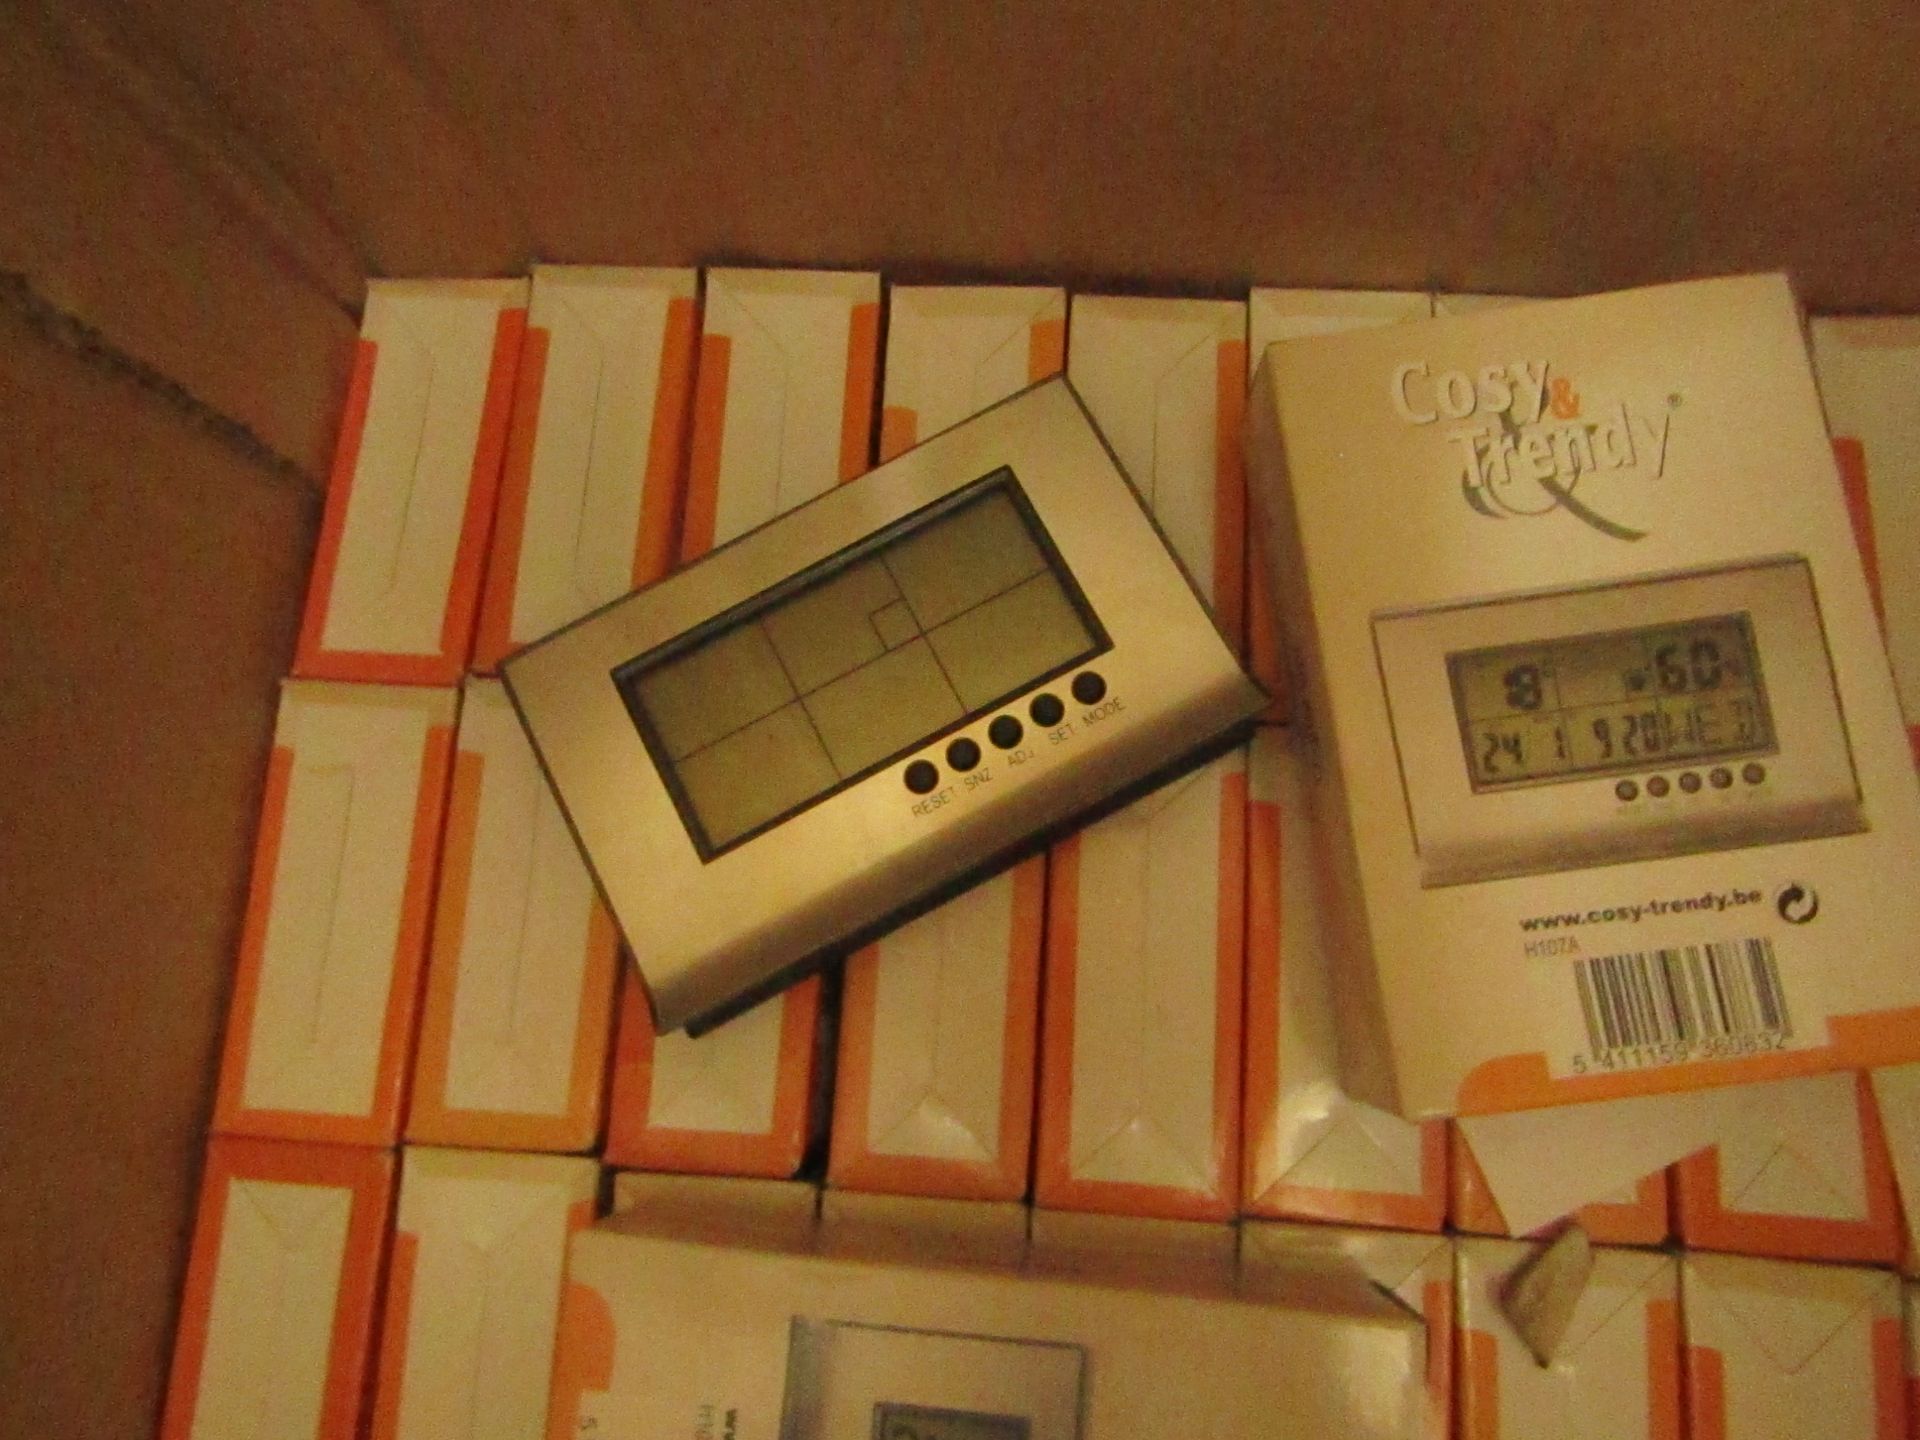 20x Cosy & Trendy - Digital Clock - Unsed & Boxed.